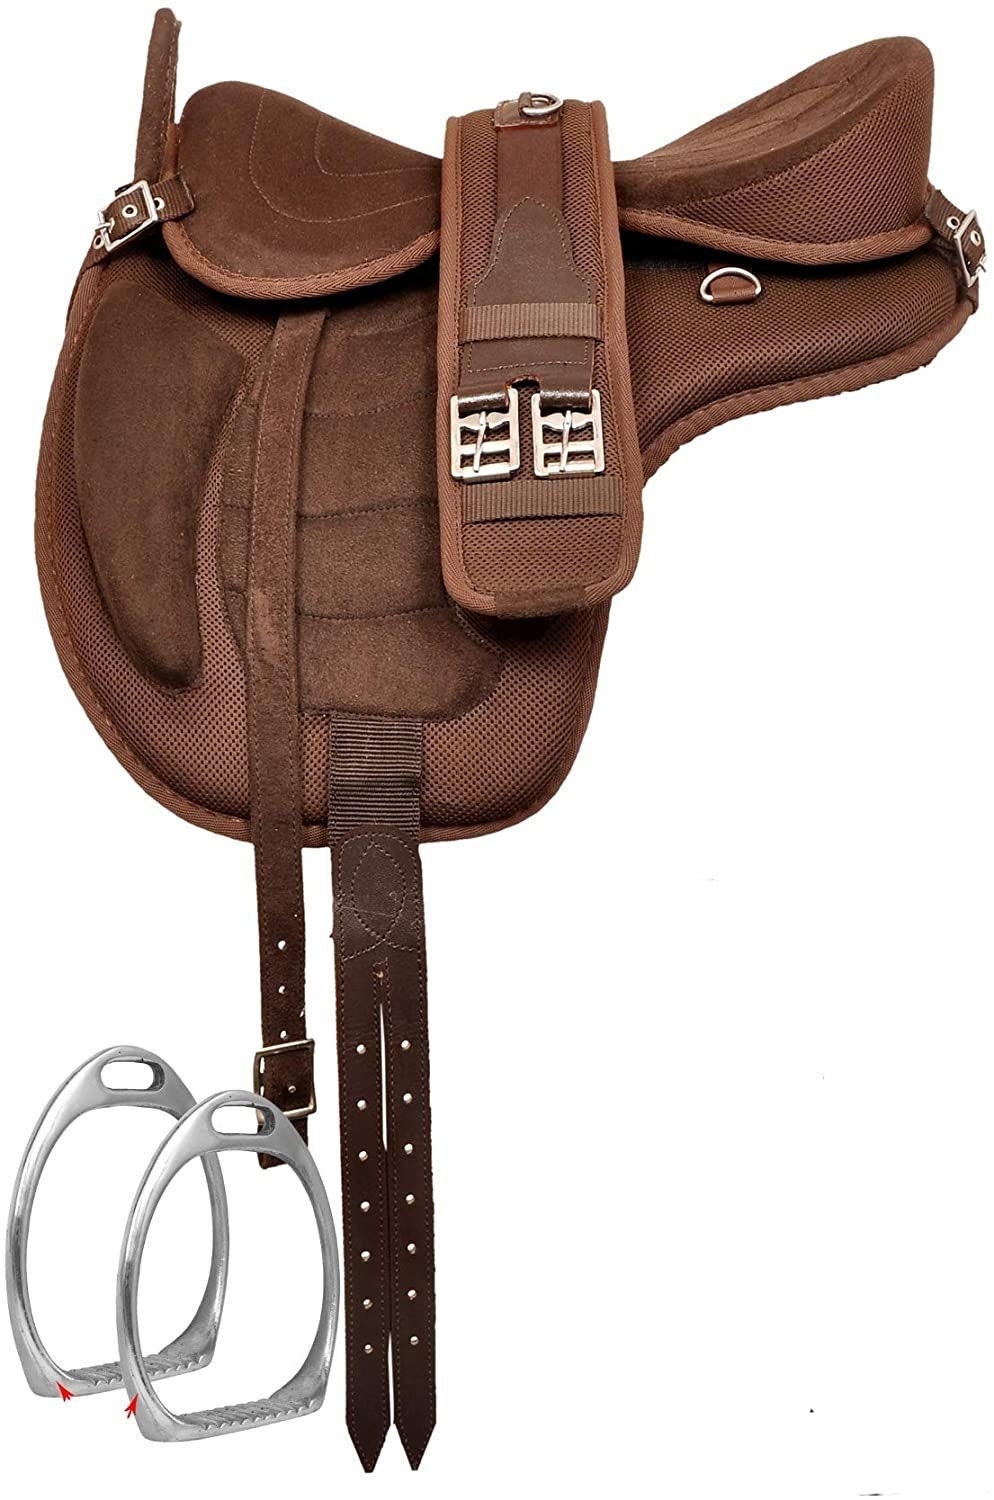 New Handmade Treeless Freemax Synthetic Horse English Saddle With Girth Stirrup Size 14" To 18" Inches Seat